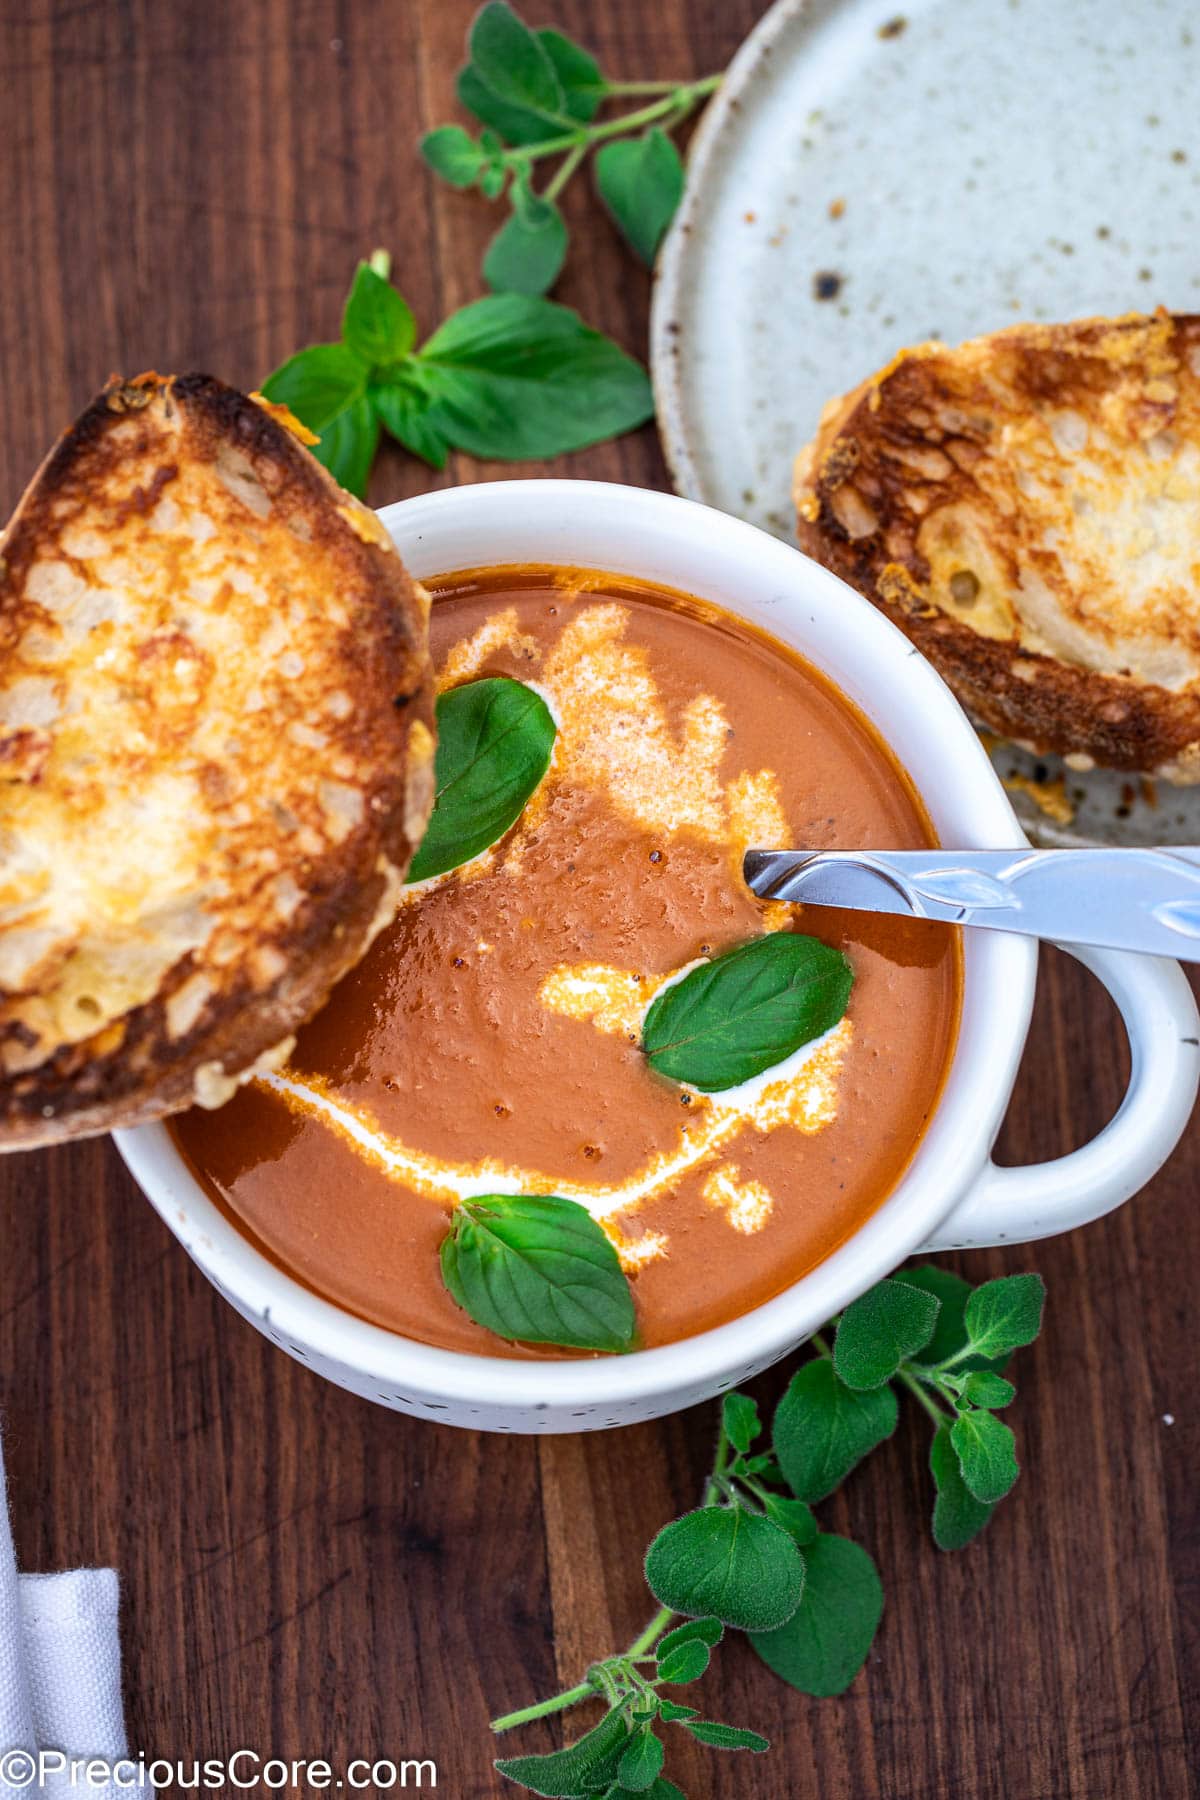 Cozy bowl of tomato soup with heavy cream drizzled on top.